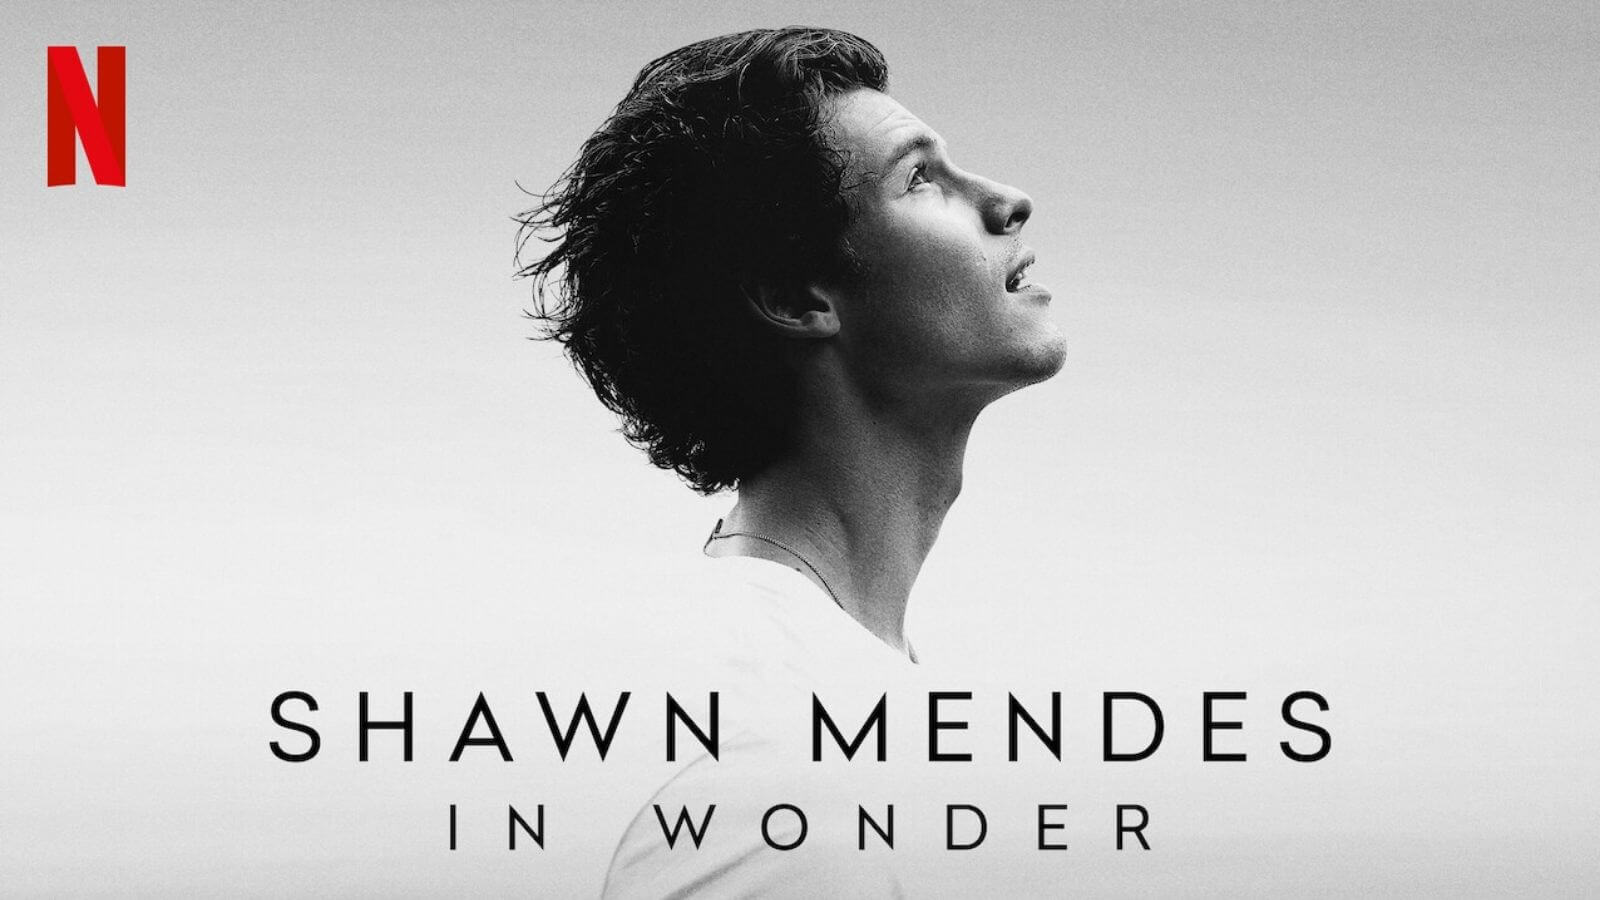 Shawn Mendes: In Wonder coming on Netflix from November 23